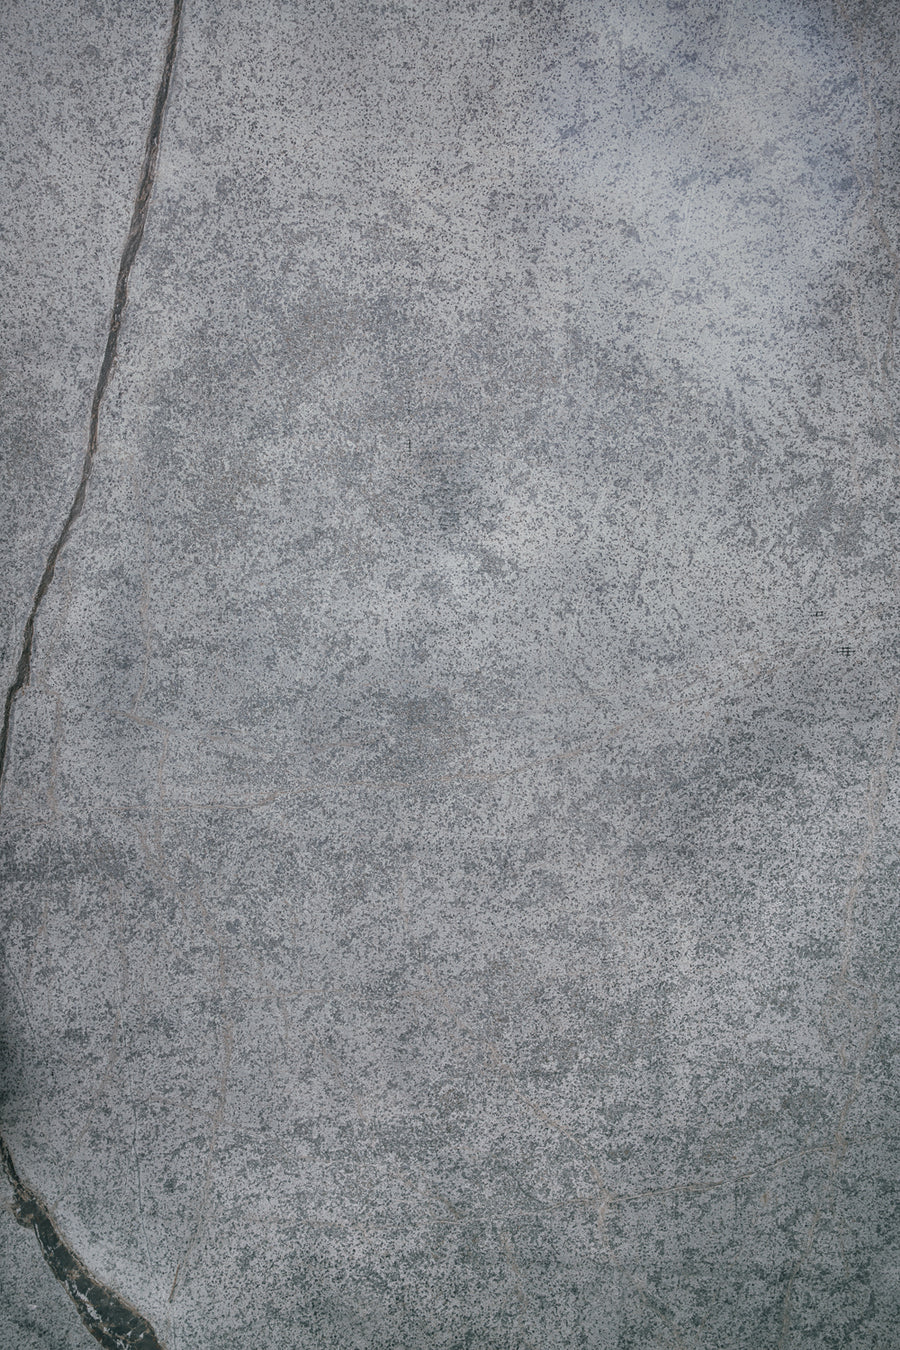 Gray textured stone photography surface